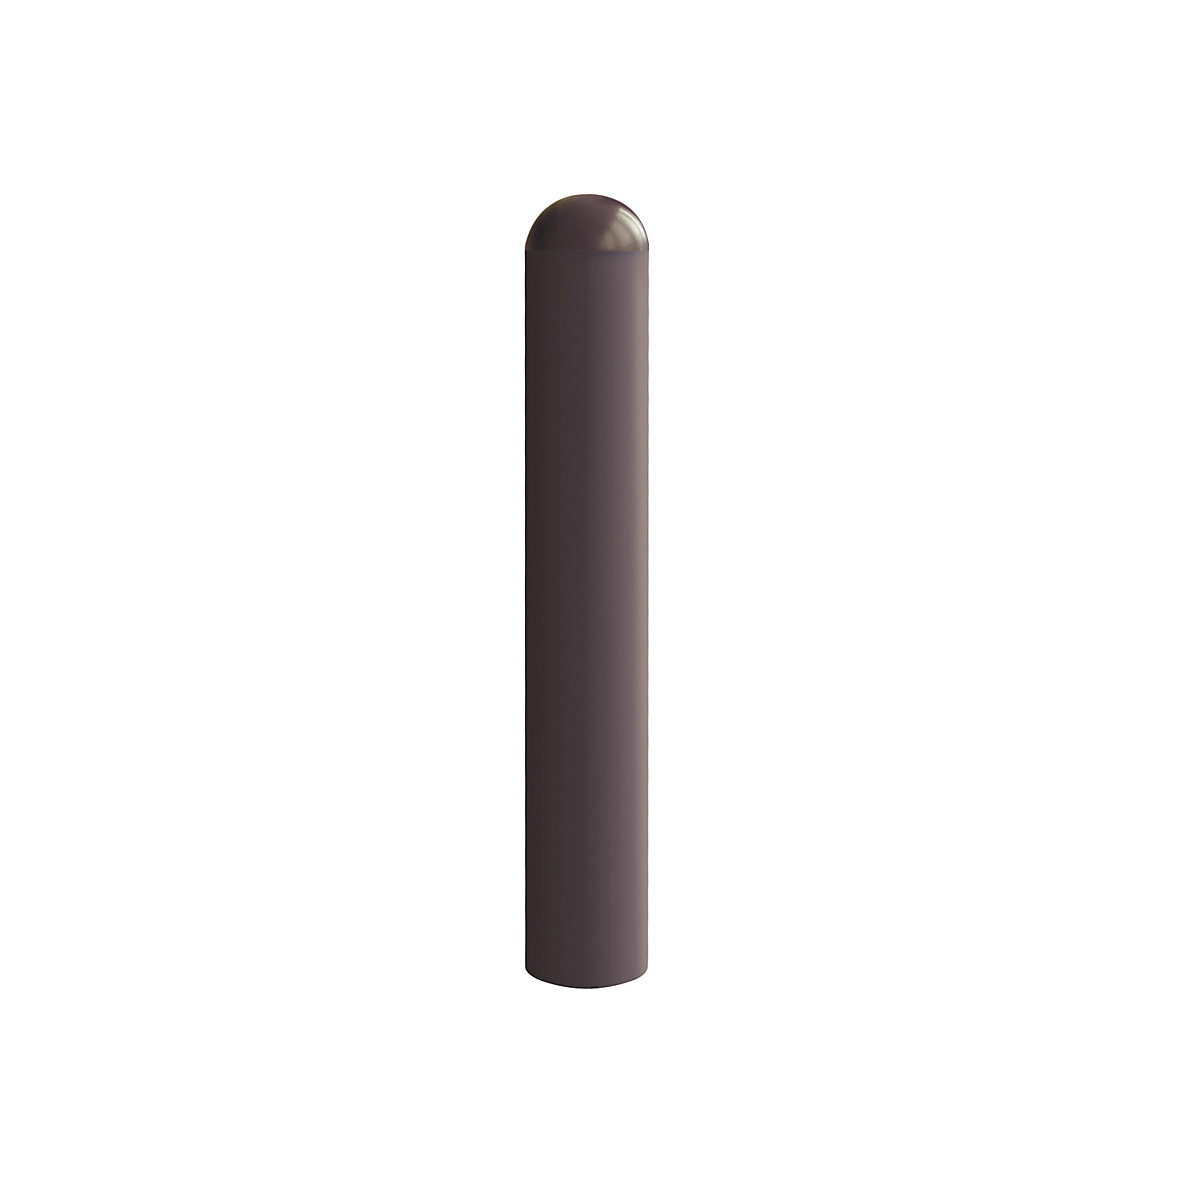 City bollard, height 1250 mm, allows removal, with triangle lock, Ø 90 mm-6